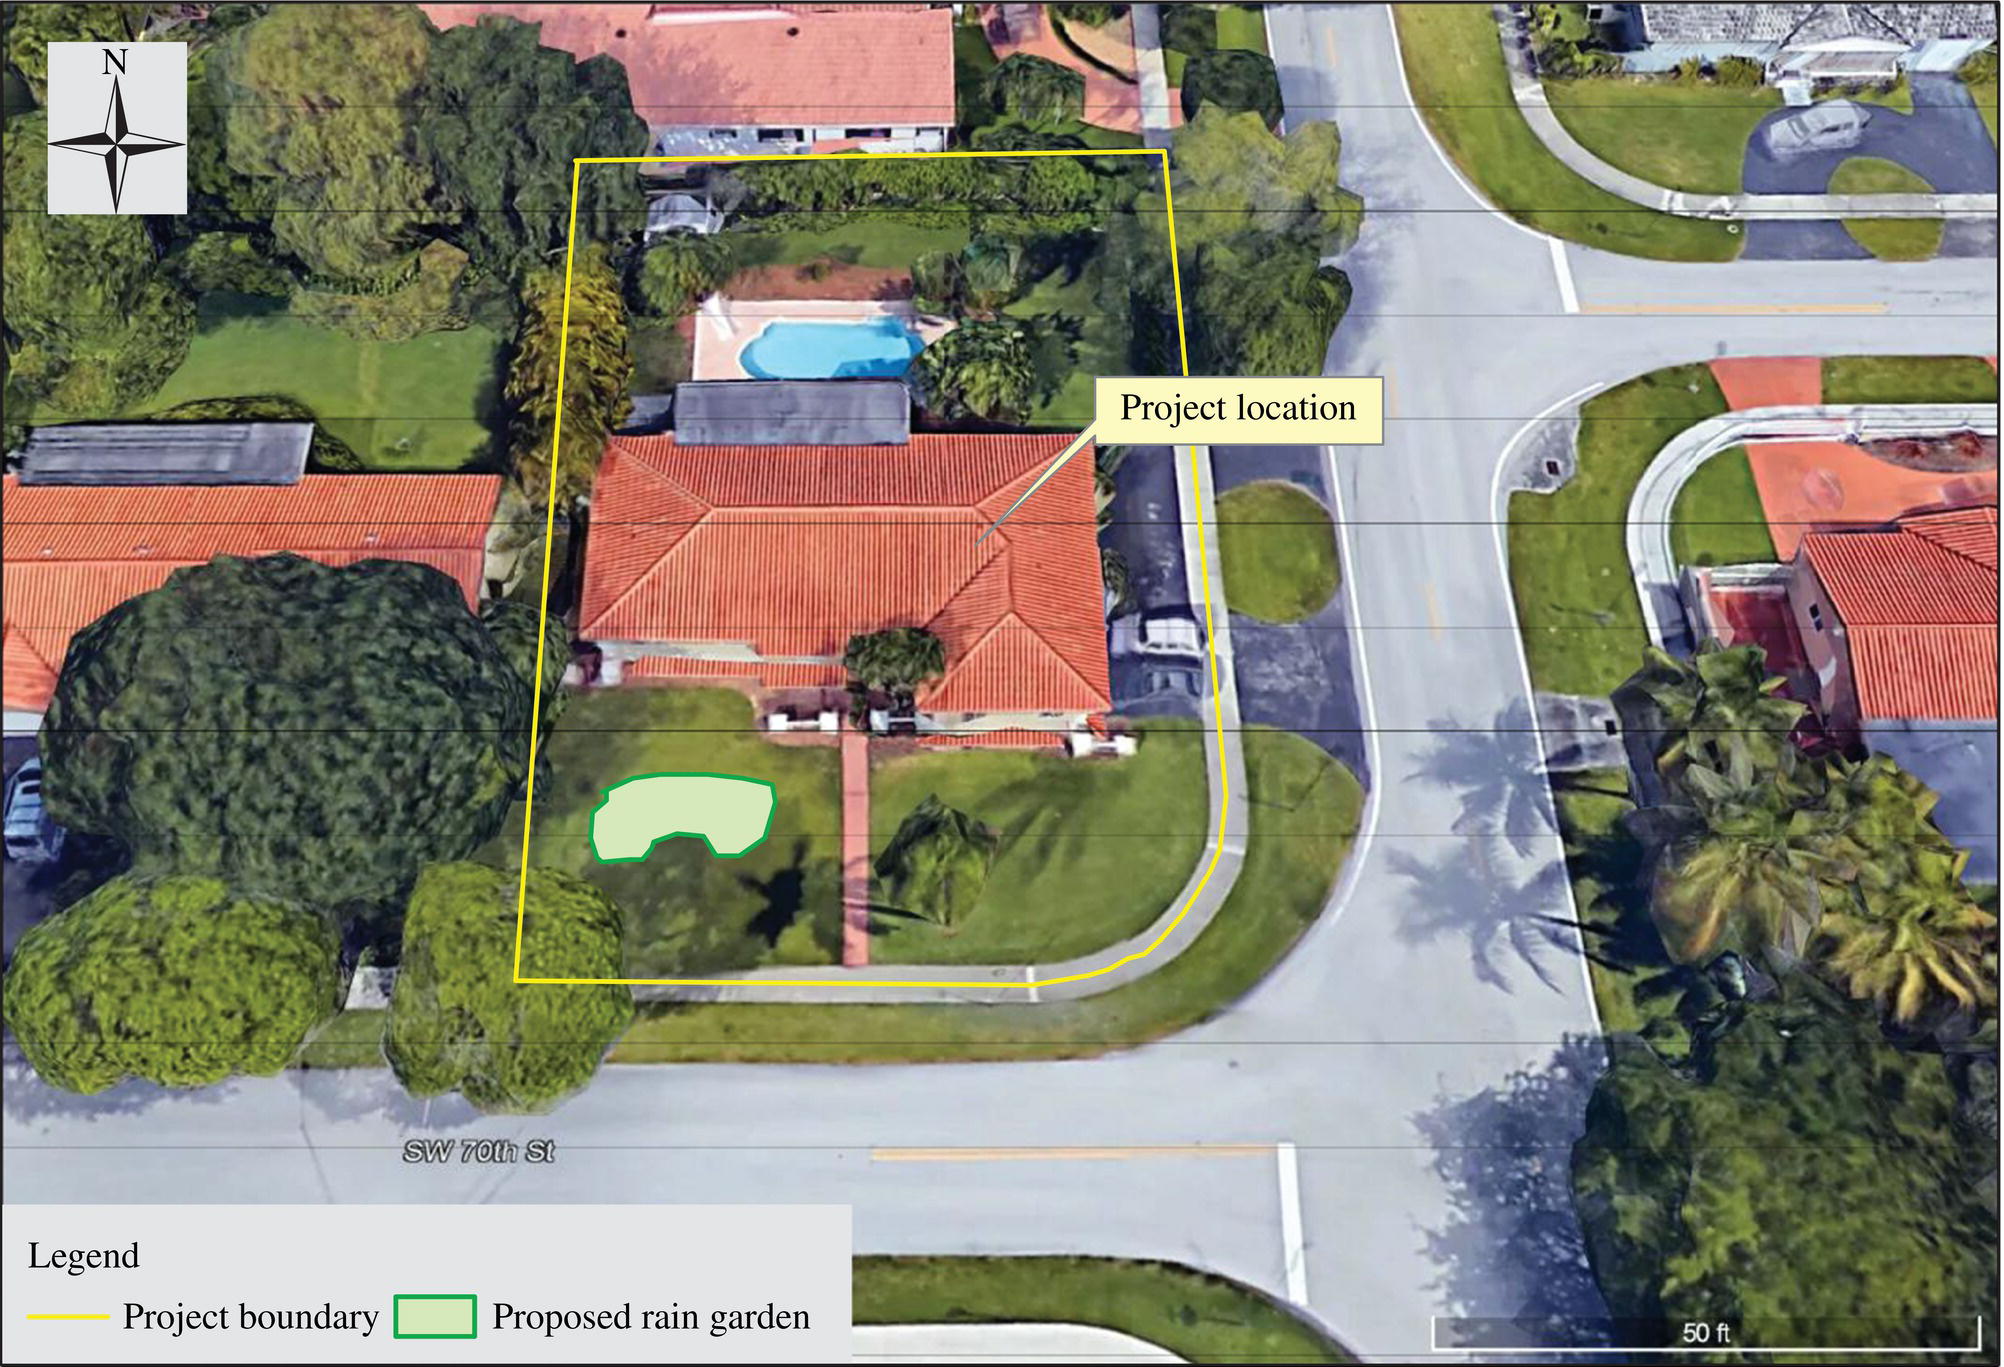 3D map of a residential house located at 9240 SW 70th Street, Miami, FL, USA with project boundary (line) and proposed rain garden (shaded area) indicated.